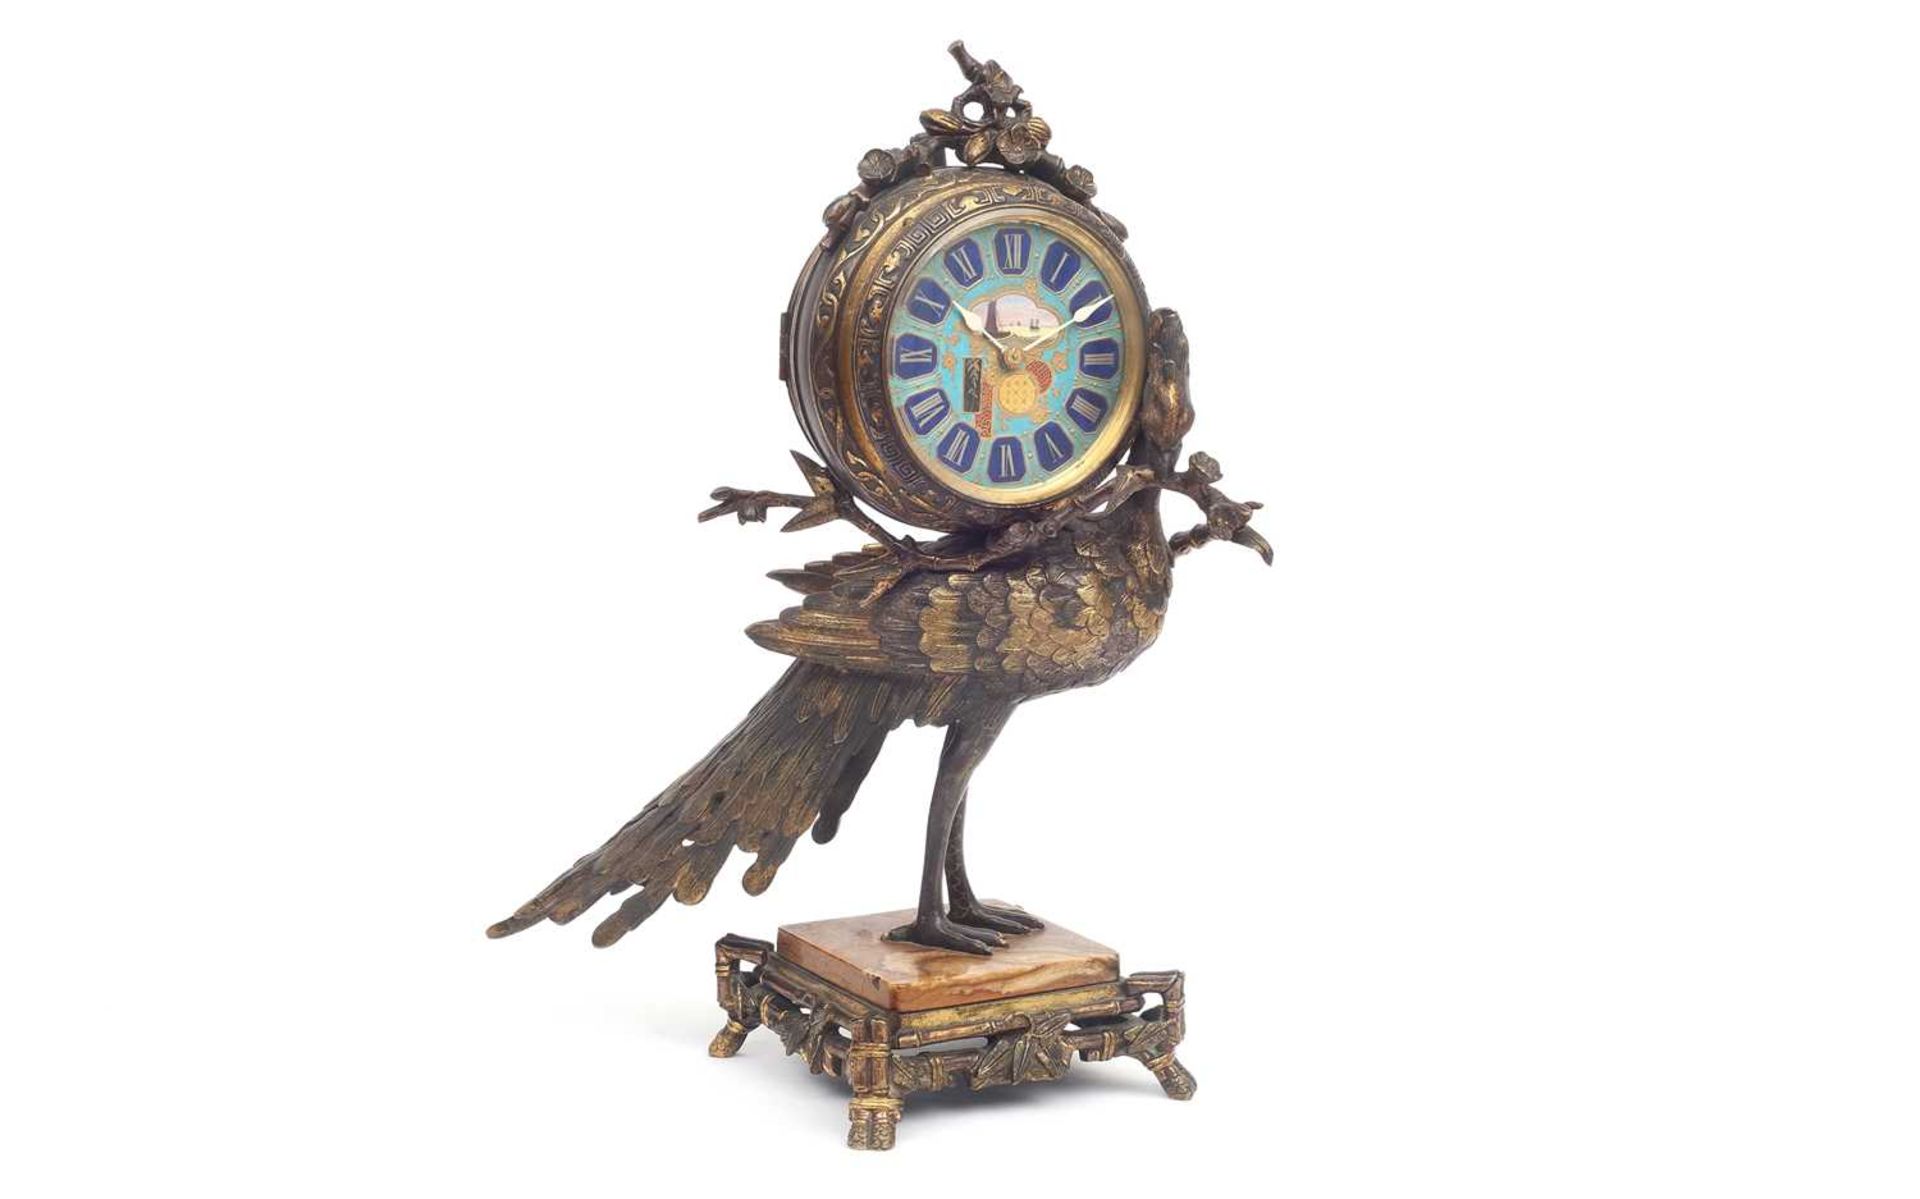 ATTRIBUTED TO L'ESCALIER DE CRISTAL, PARIS: A FINE LATE 19TH CENTURY FRENCH PEACOCK CLOCK - Image 3 of 4